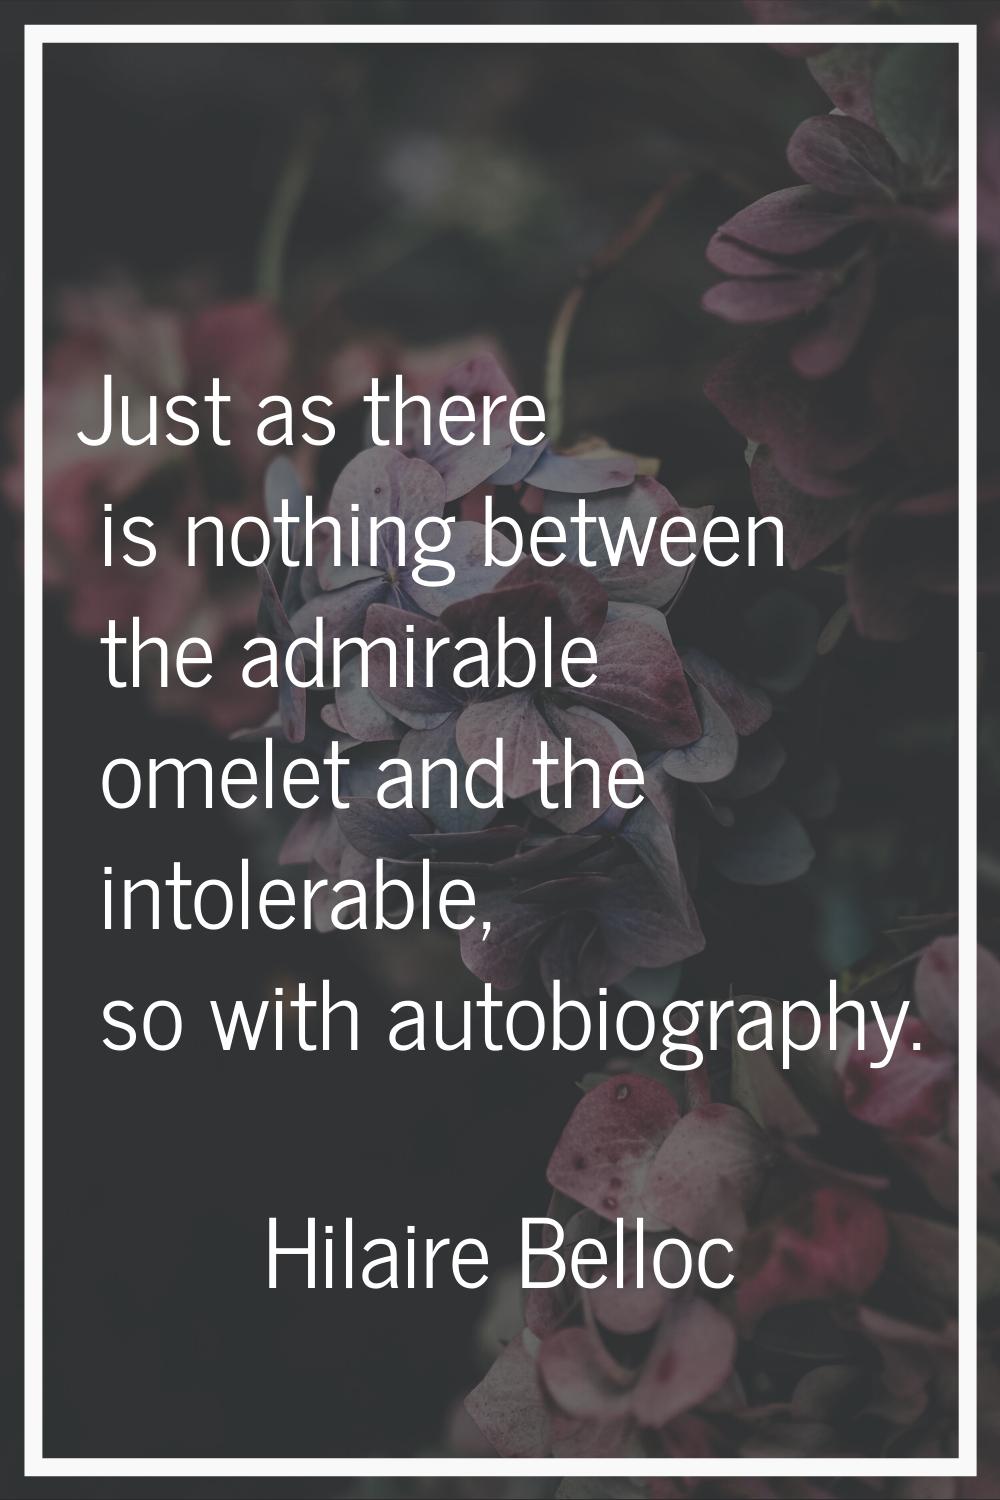 Just as there is nothing between the admirable omelet and the intolerable, so with autobiography.